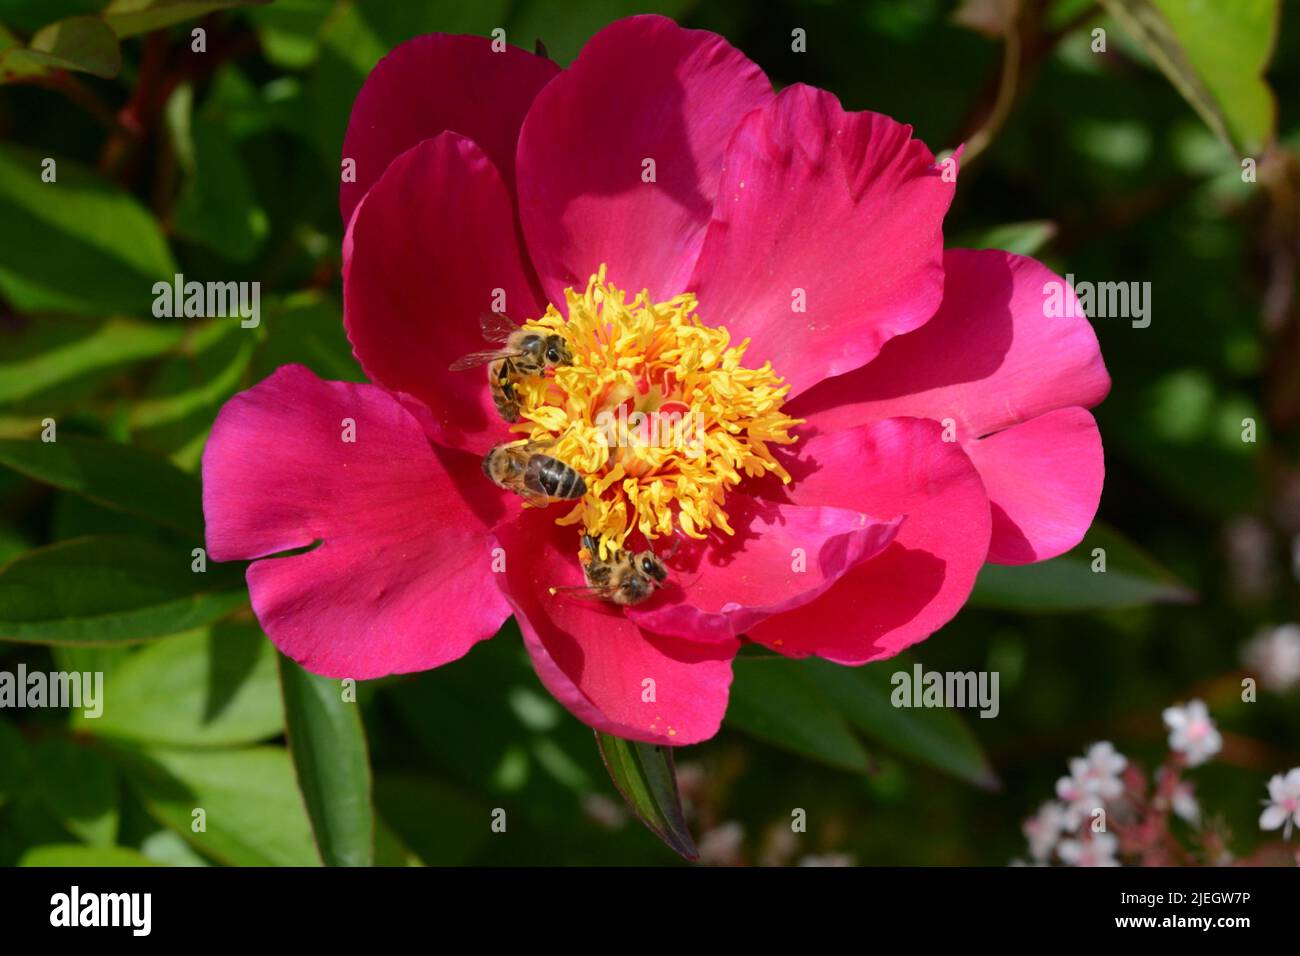 Honey bees foraging on Paeonia lactiflora Mistral Mistral peony flower Stock Photo